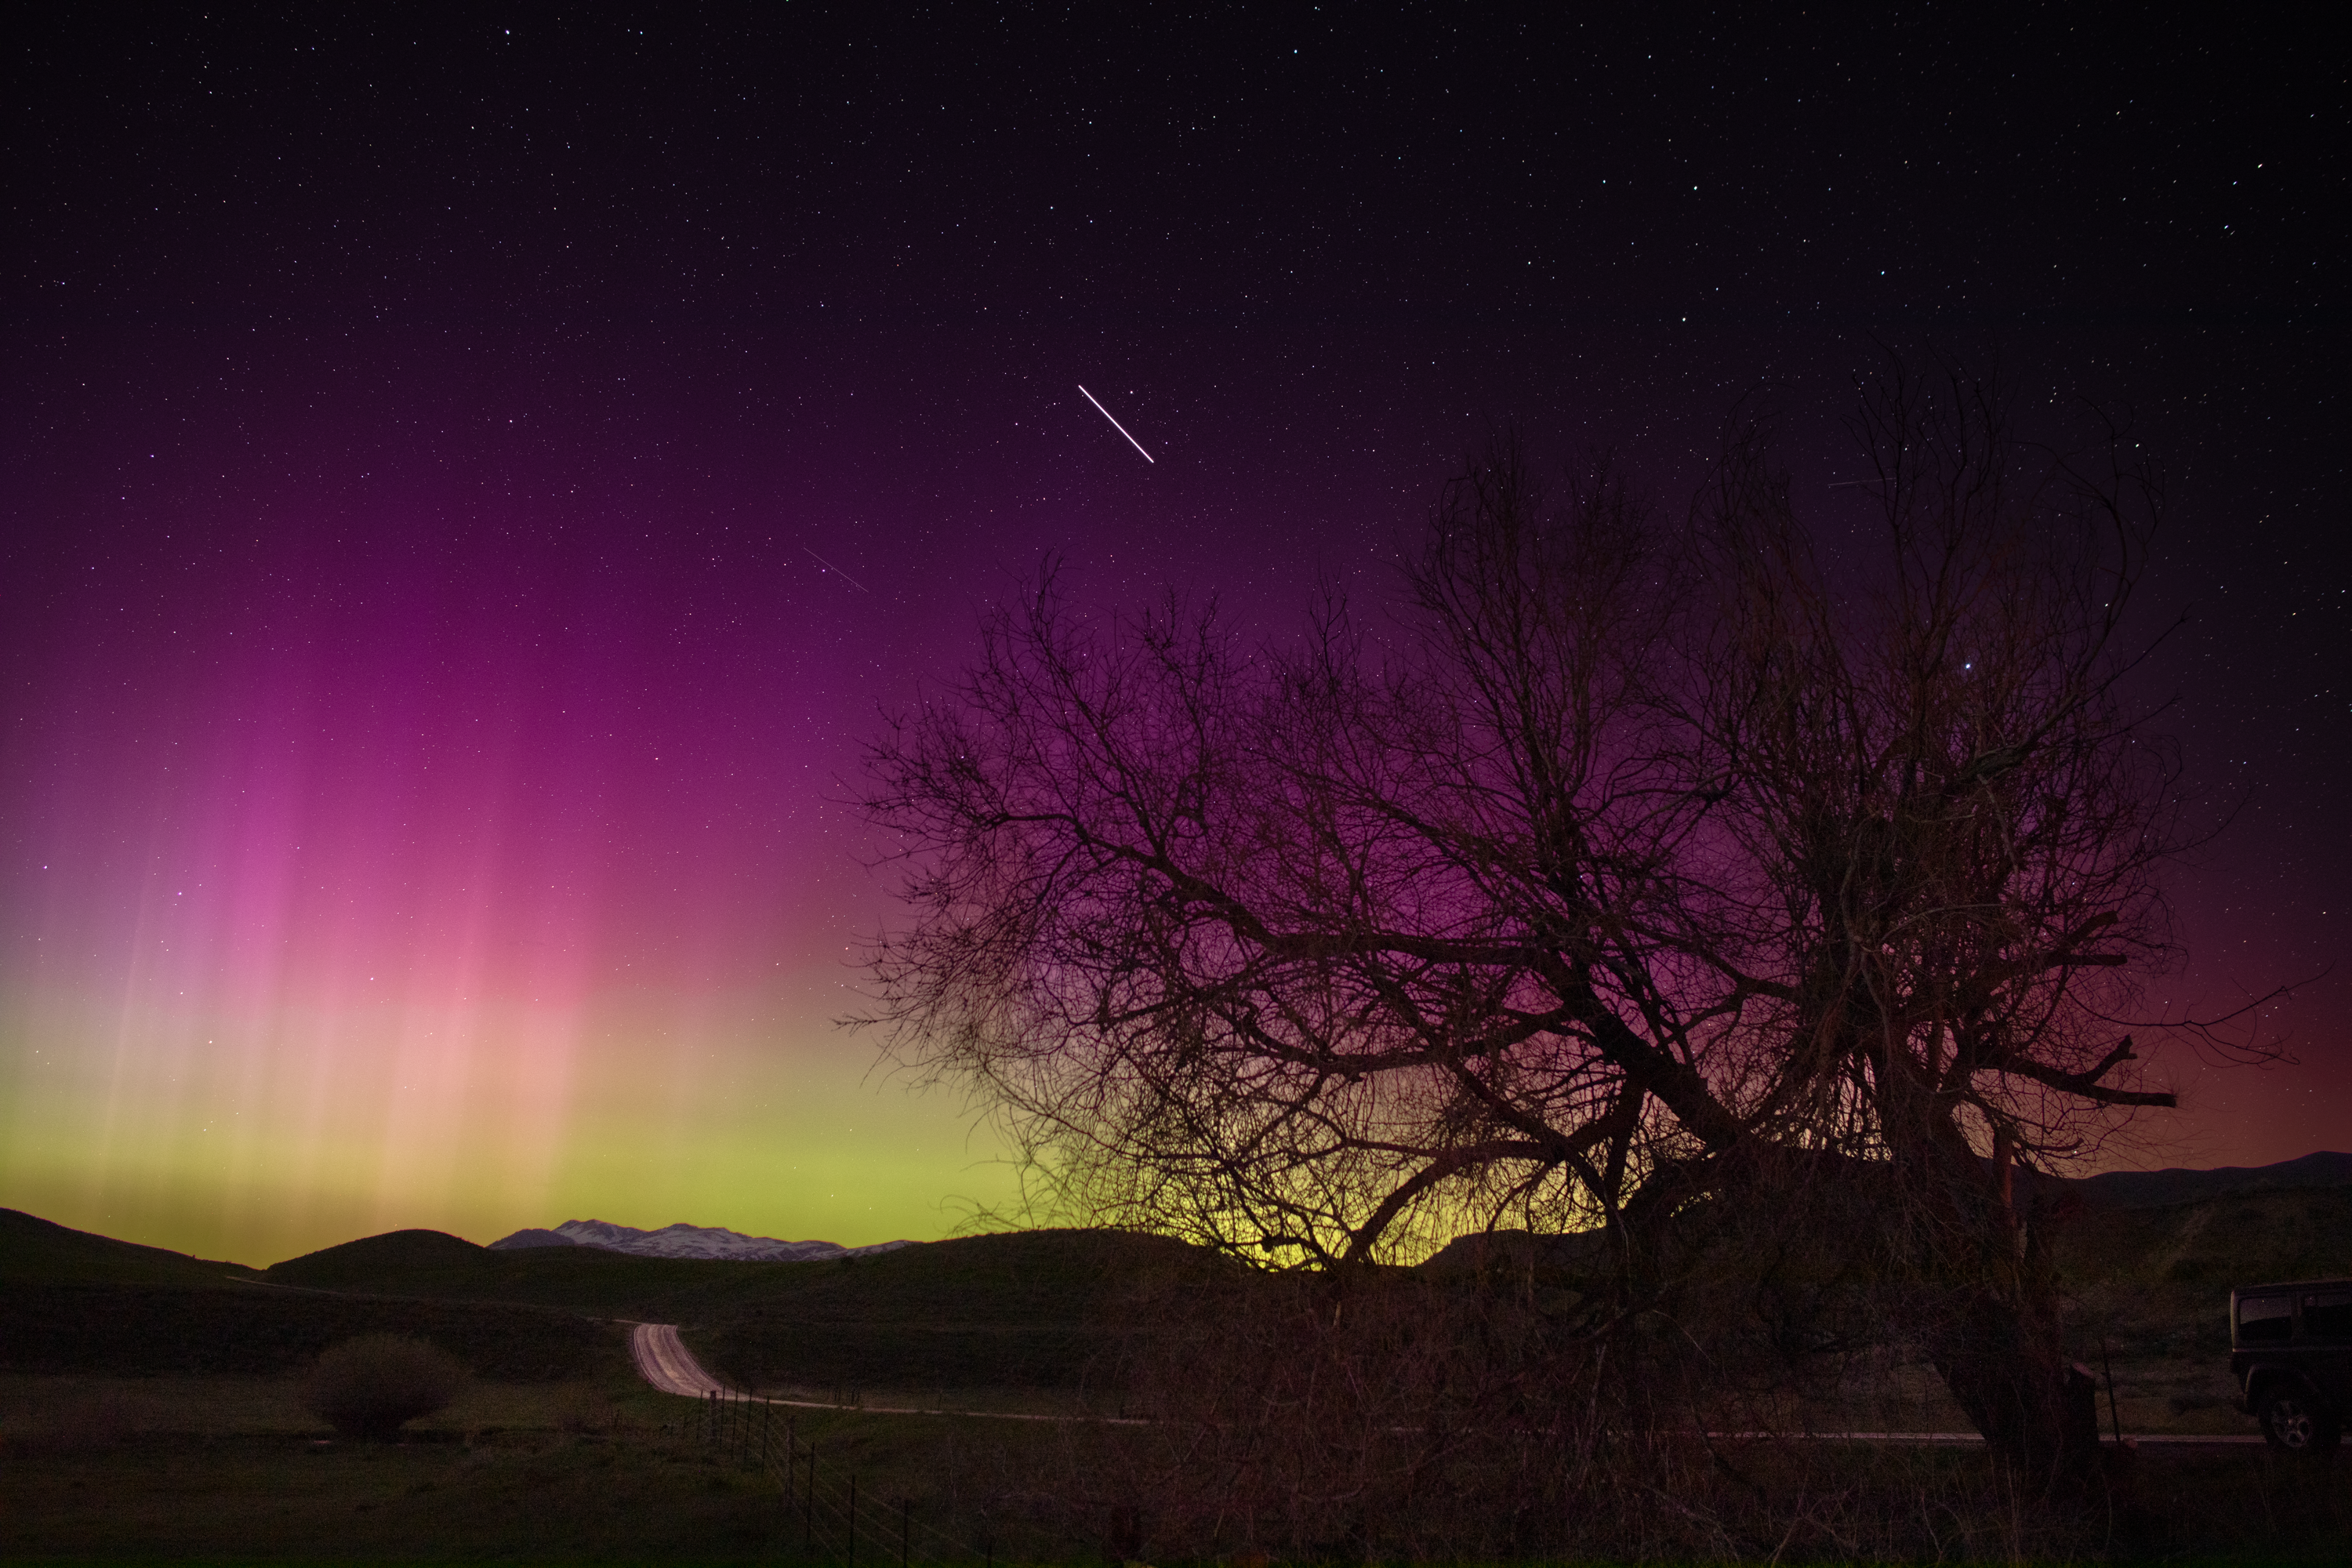 A tree (bottom right) and its branches are silhouetted against the dramatic night sky, which is red, purple, and green. Streaks of light shimmer, making the aurora look like the folds in a curtain (middle left). A road winds toward the mountainous horizon (bottom middle), and the back of a car appears (bottom right). There is a white streak in the sky (middle top). This is likely the International Space Station, which passed over the area at the time the image was taken.